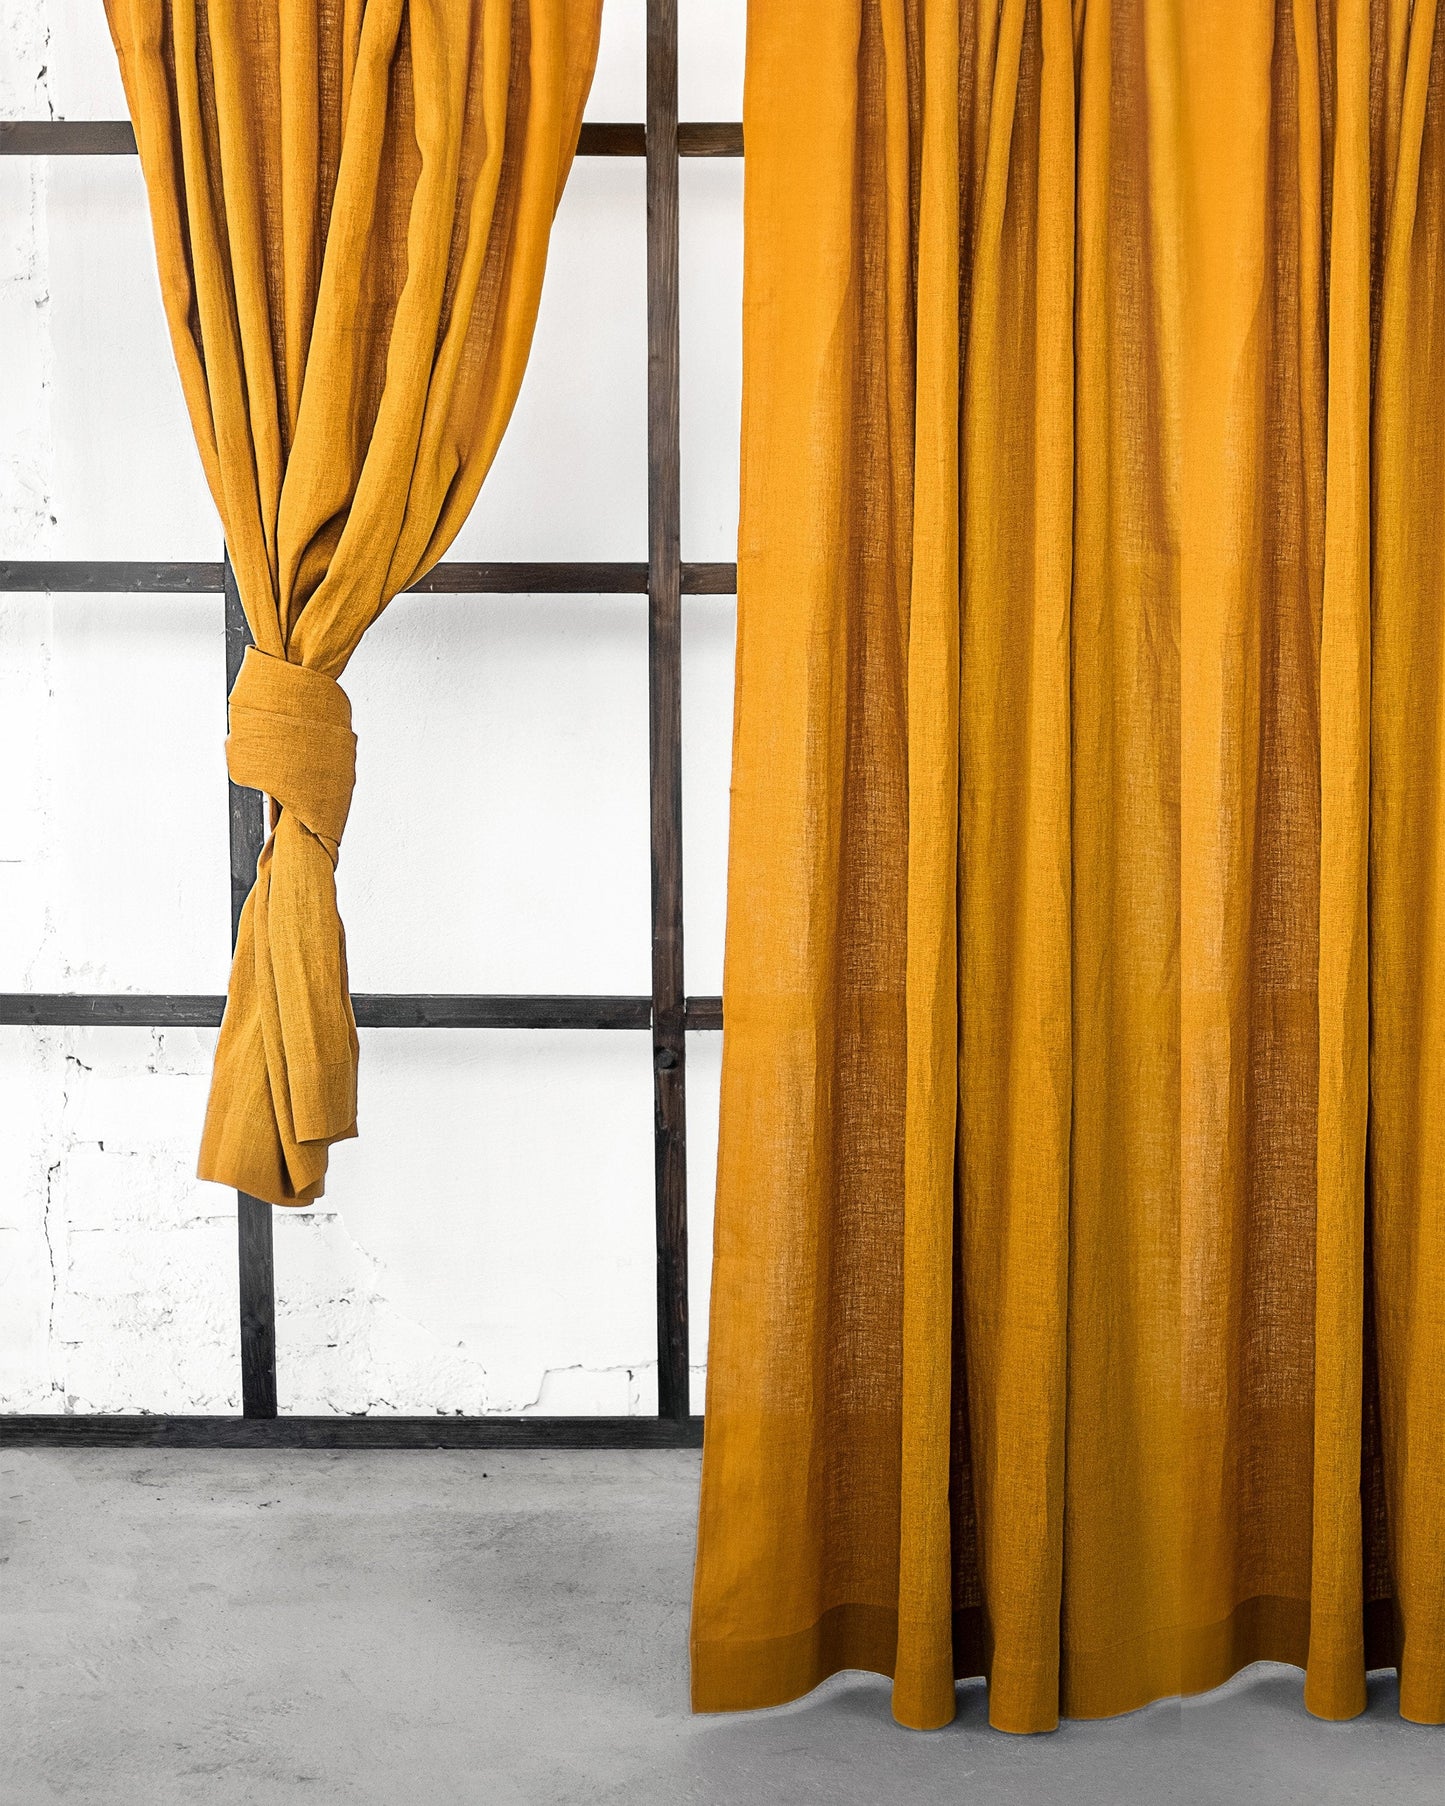 Linen Curtains & Drapes with Multi-functional Heading Tape in Greyish